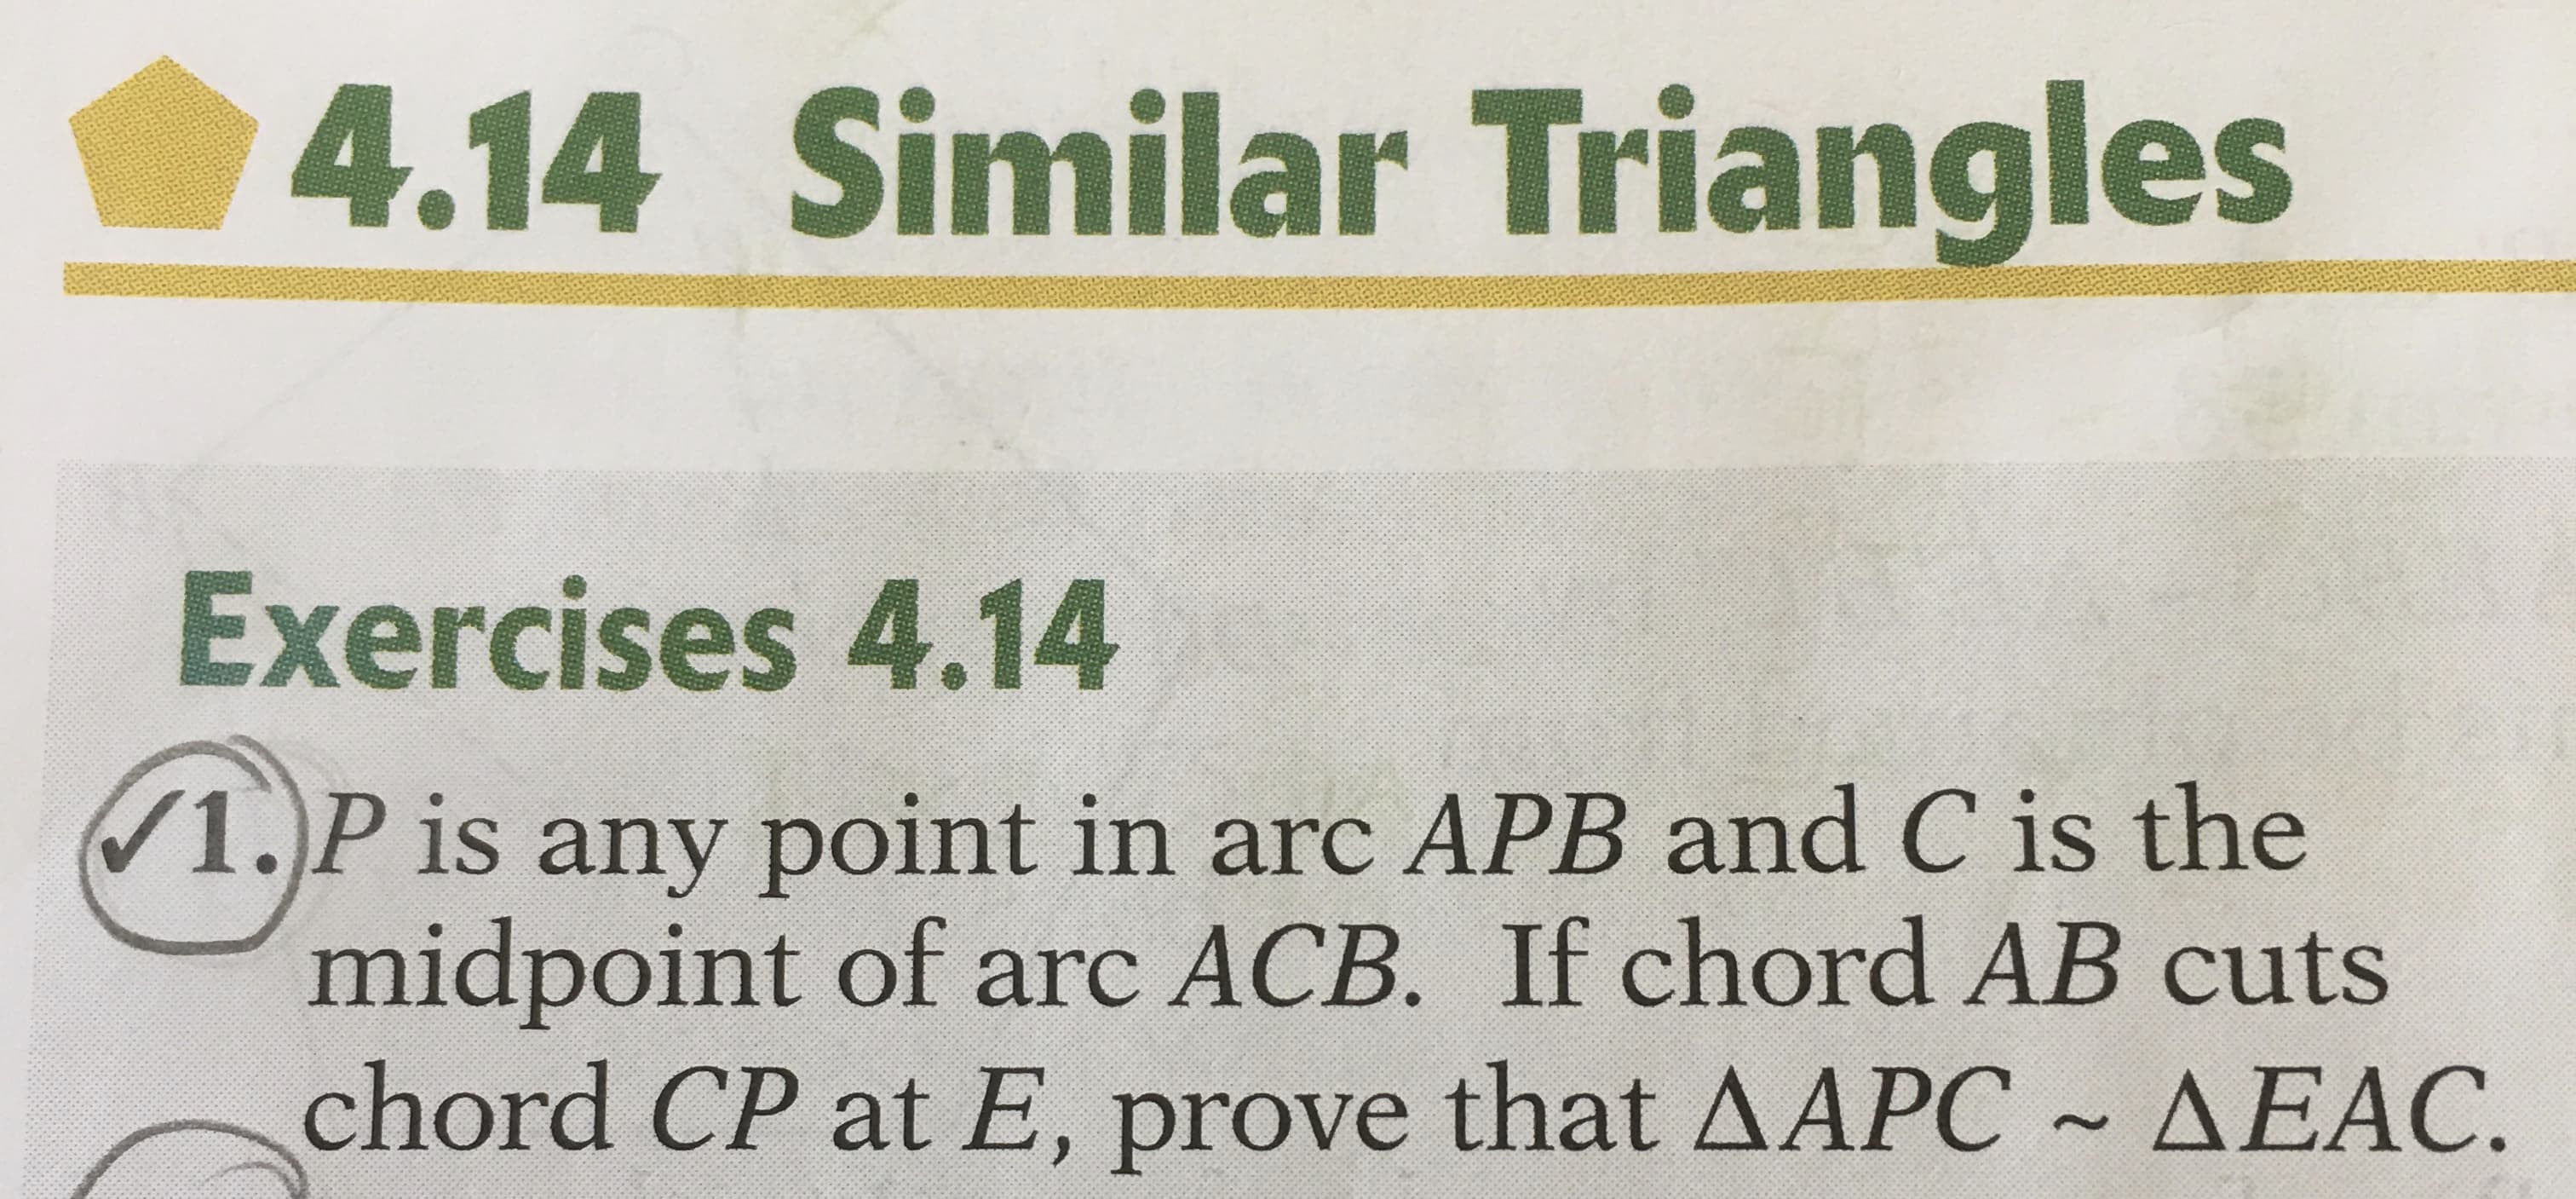 4.14 Similar Triangles
Exercises 4.14
1.)P is any point in arc APB and C is the
midpoint of arc ACB. If chord AB cuts
chord CP at E, prove that AAPC ~ AEÁC.
